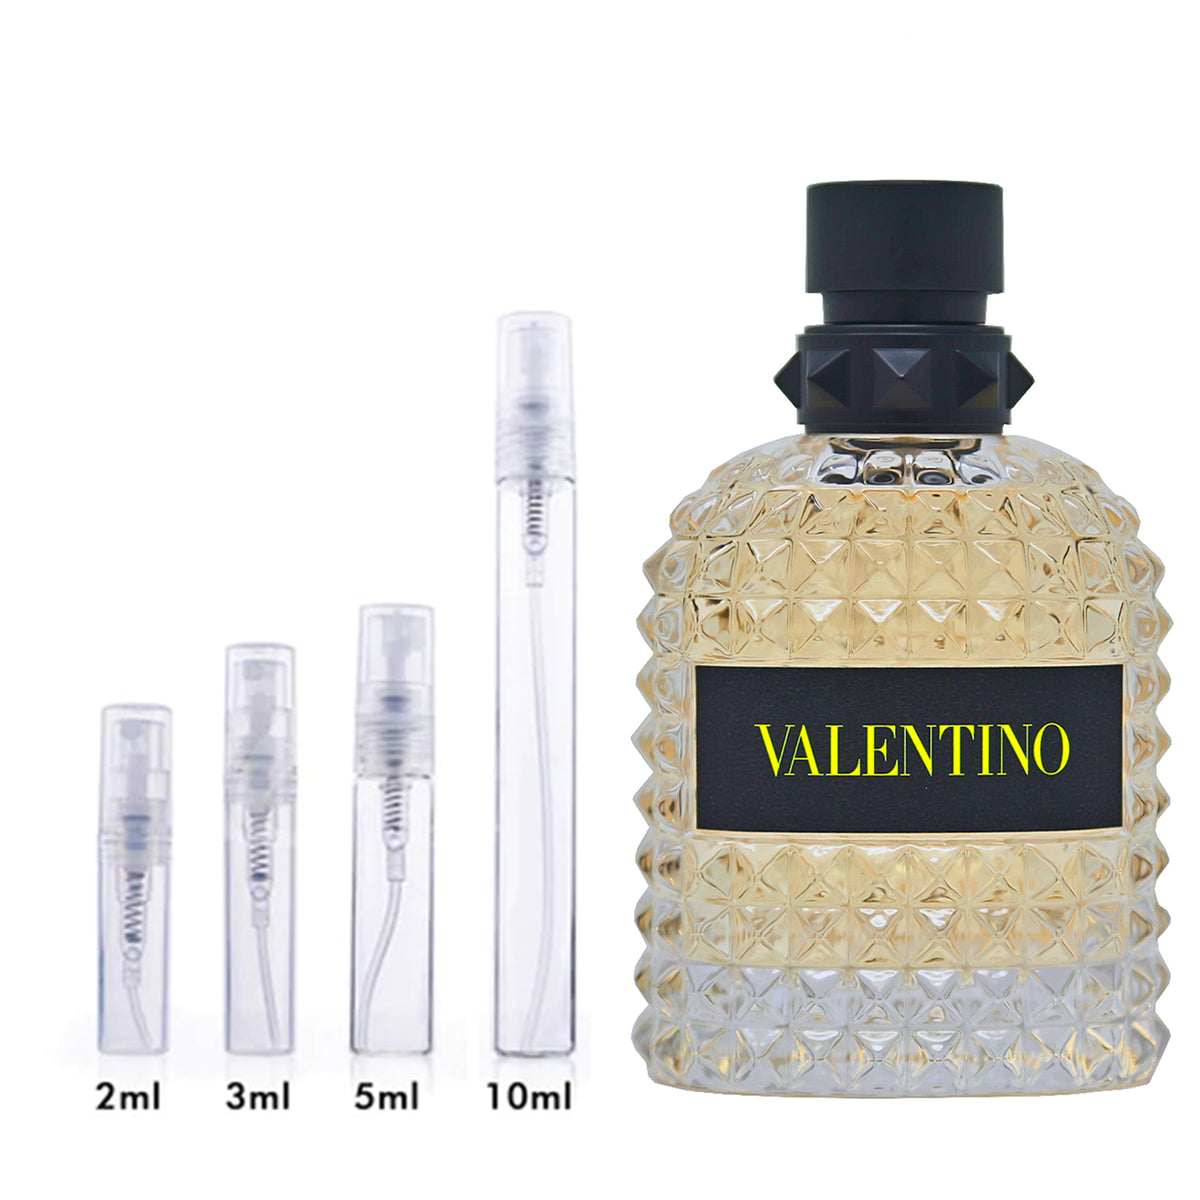 Toilette Dream | | Fragrance Atomizer In Perfume Sampler Valentino de Travel Samples DecantX Yellow and Size Scent Uomo Roma by Eau Born